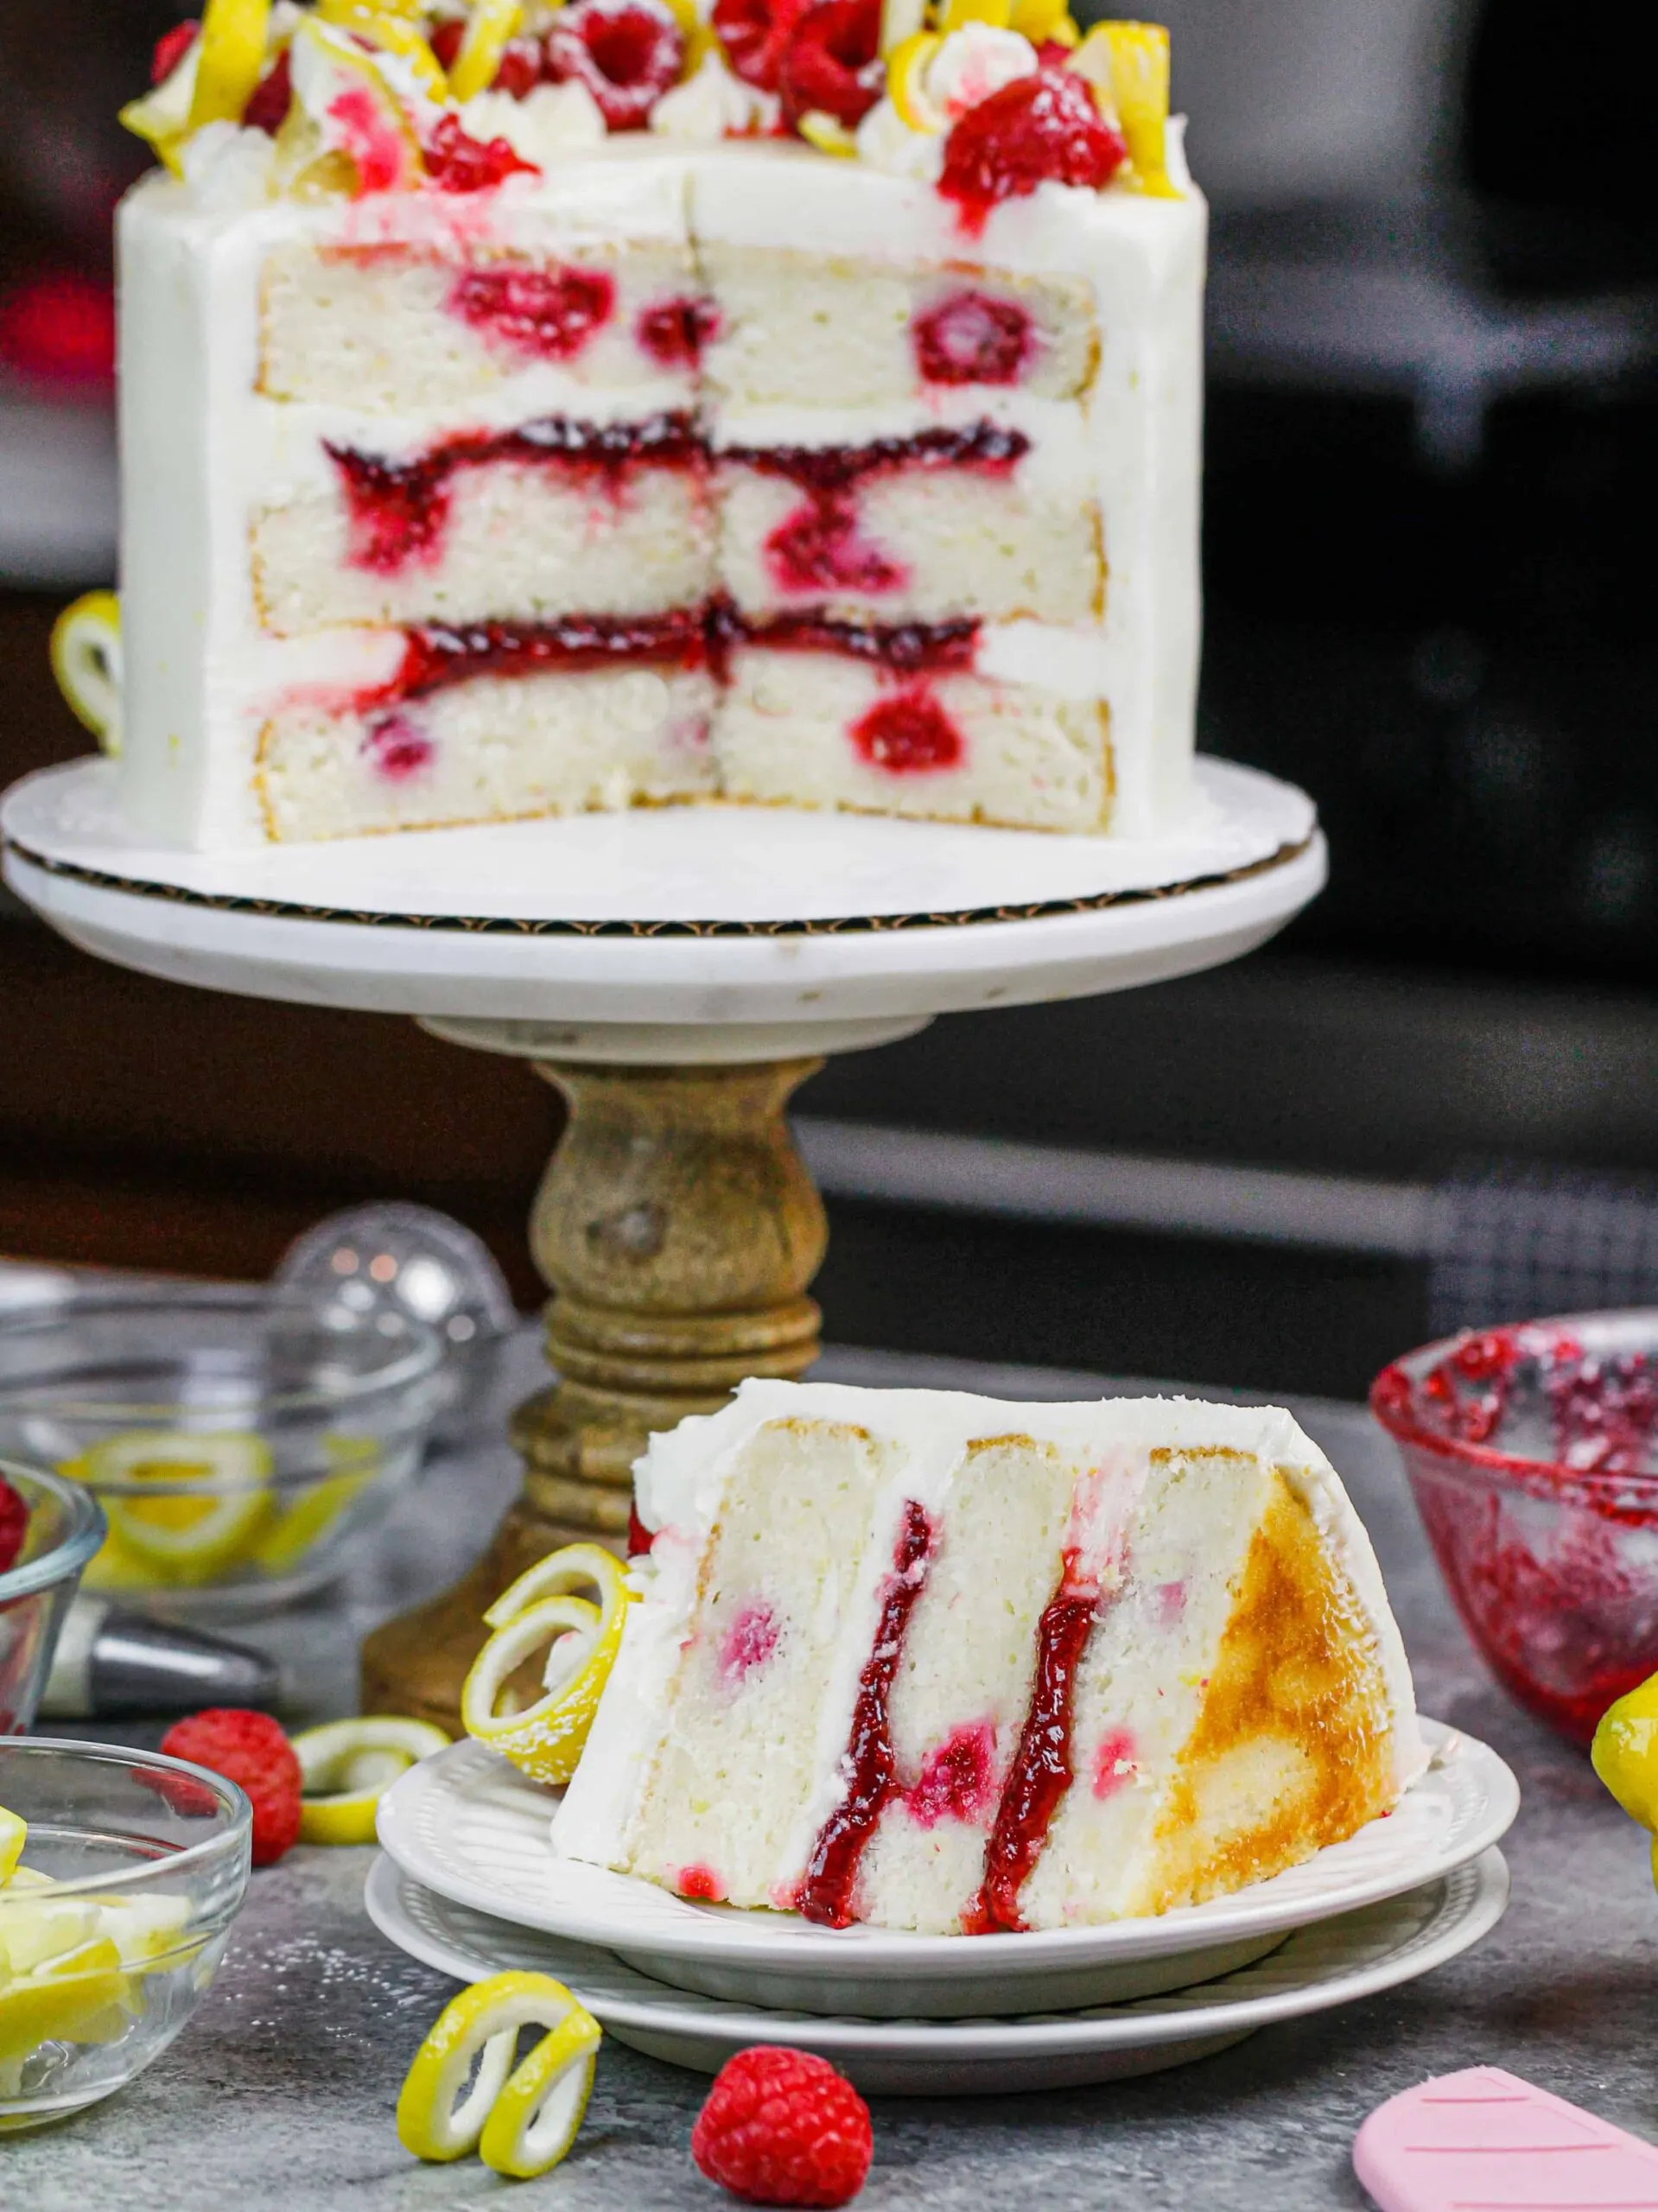 image of lemon raspberry cake slices open to show lemon cream cheese frosting and raspberry filling